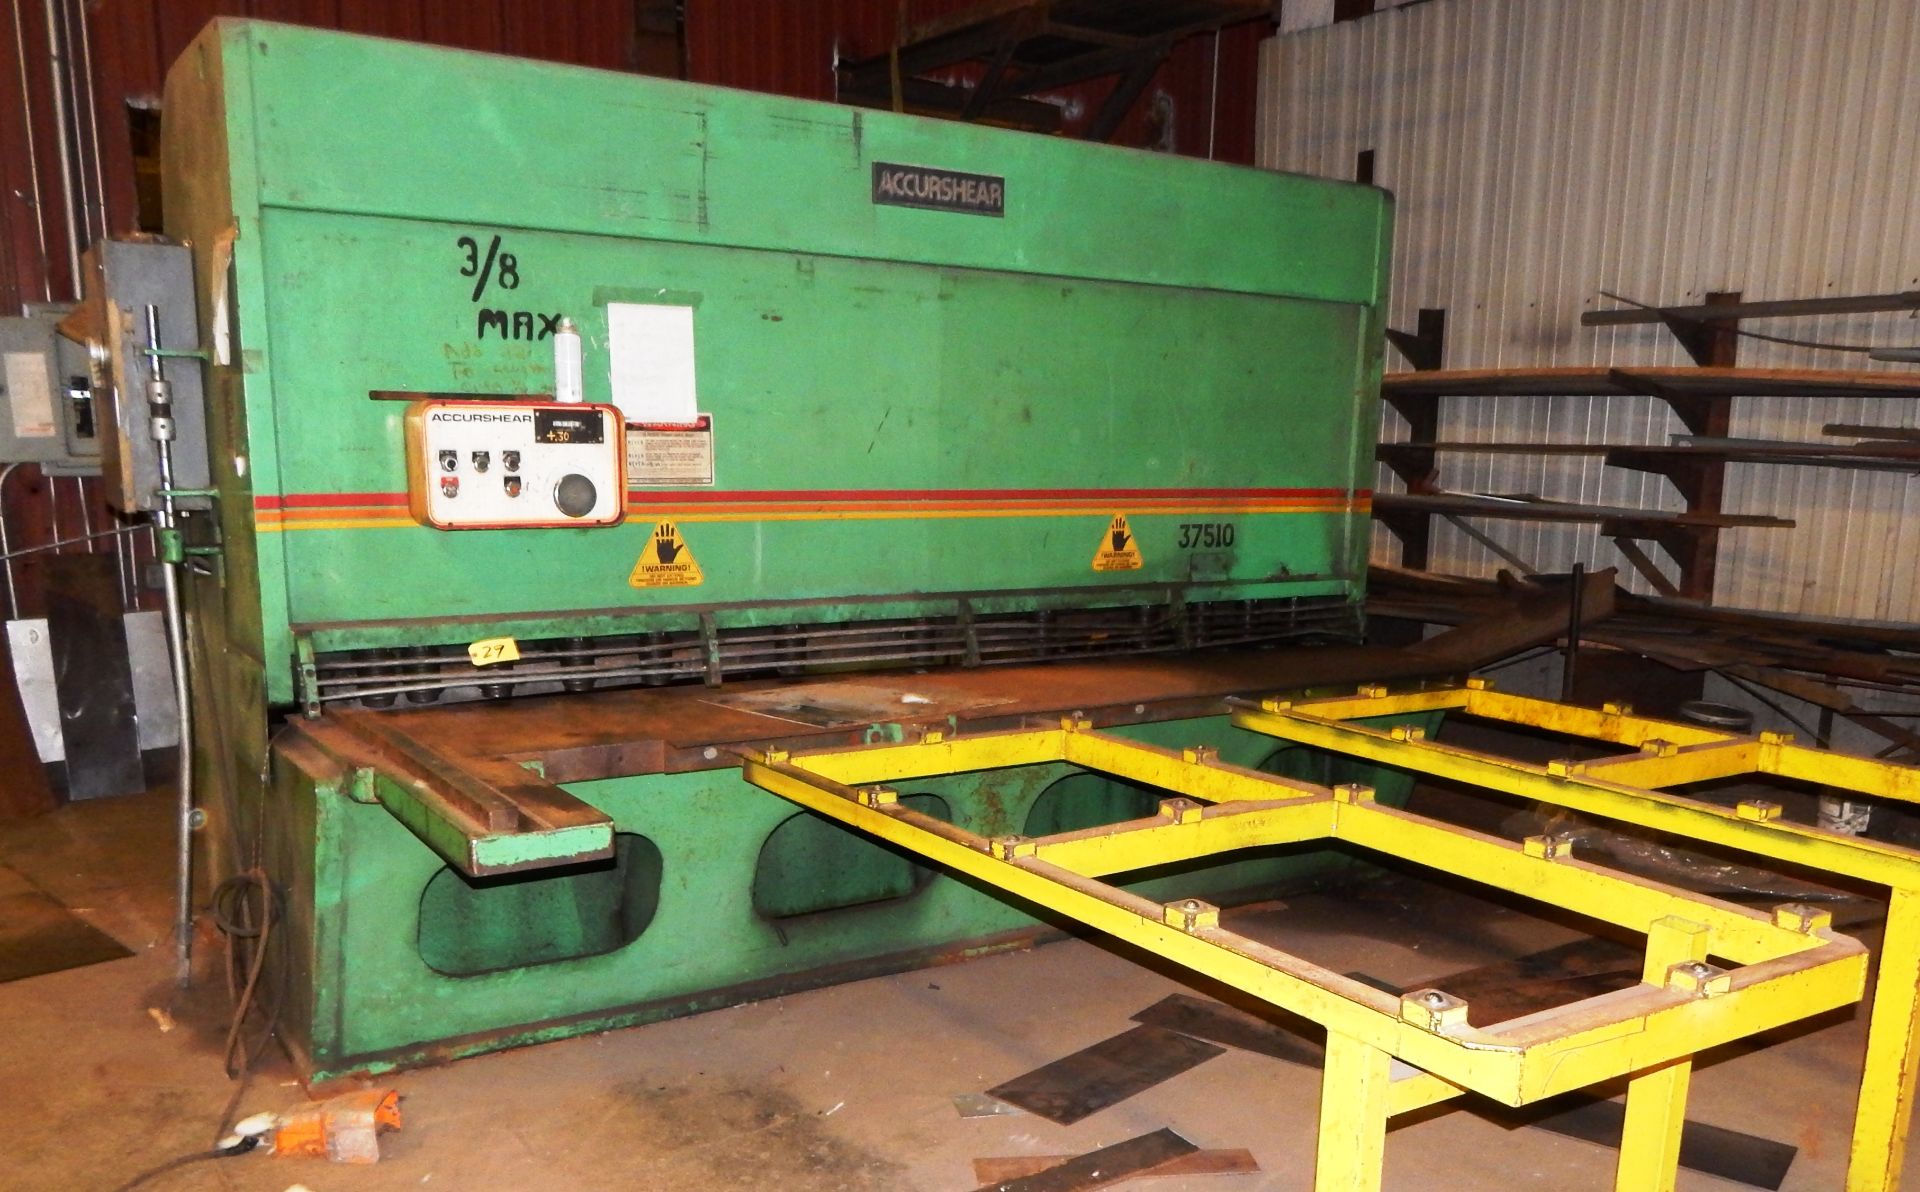 ACCURSHEAR MDL. #837510 POWER SQUARING SHEAR 10' X .375'', (2) ROLLER STAND FEED TABLES, FRONT